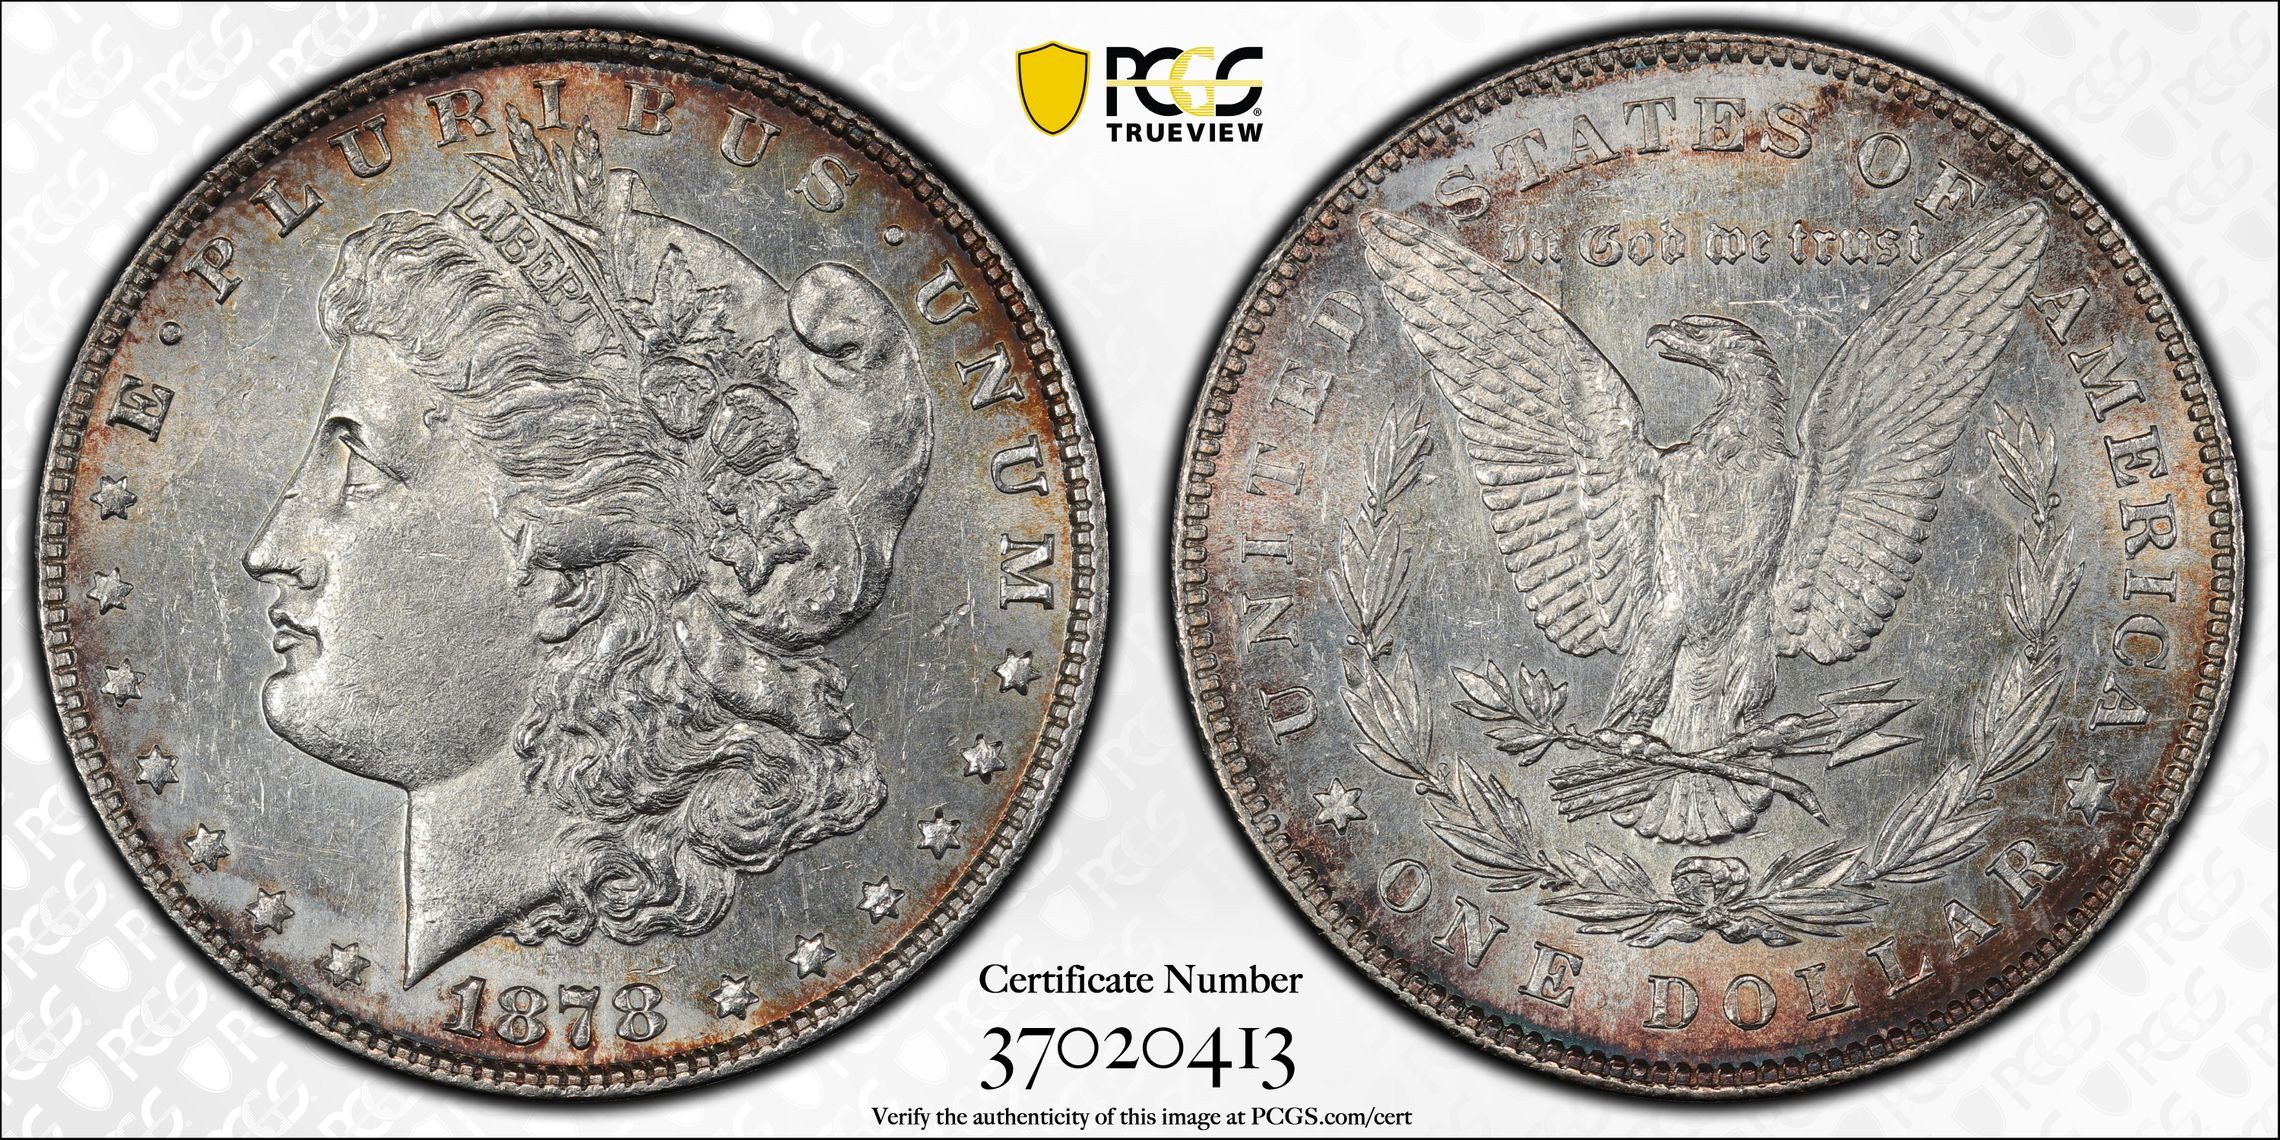 PCGS CoinFacts - U.S. Coin Val - Apps on Google Play